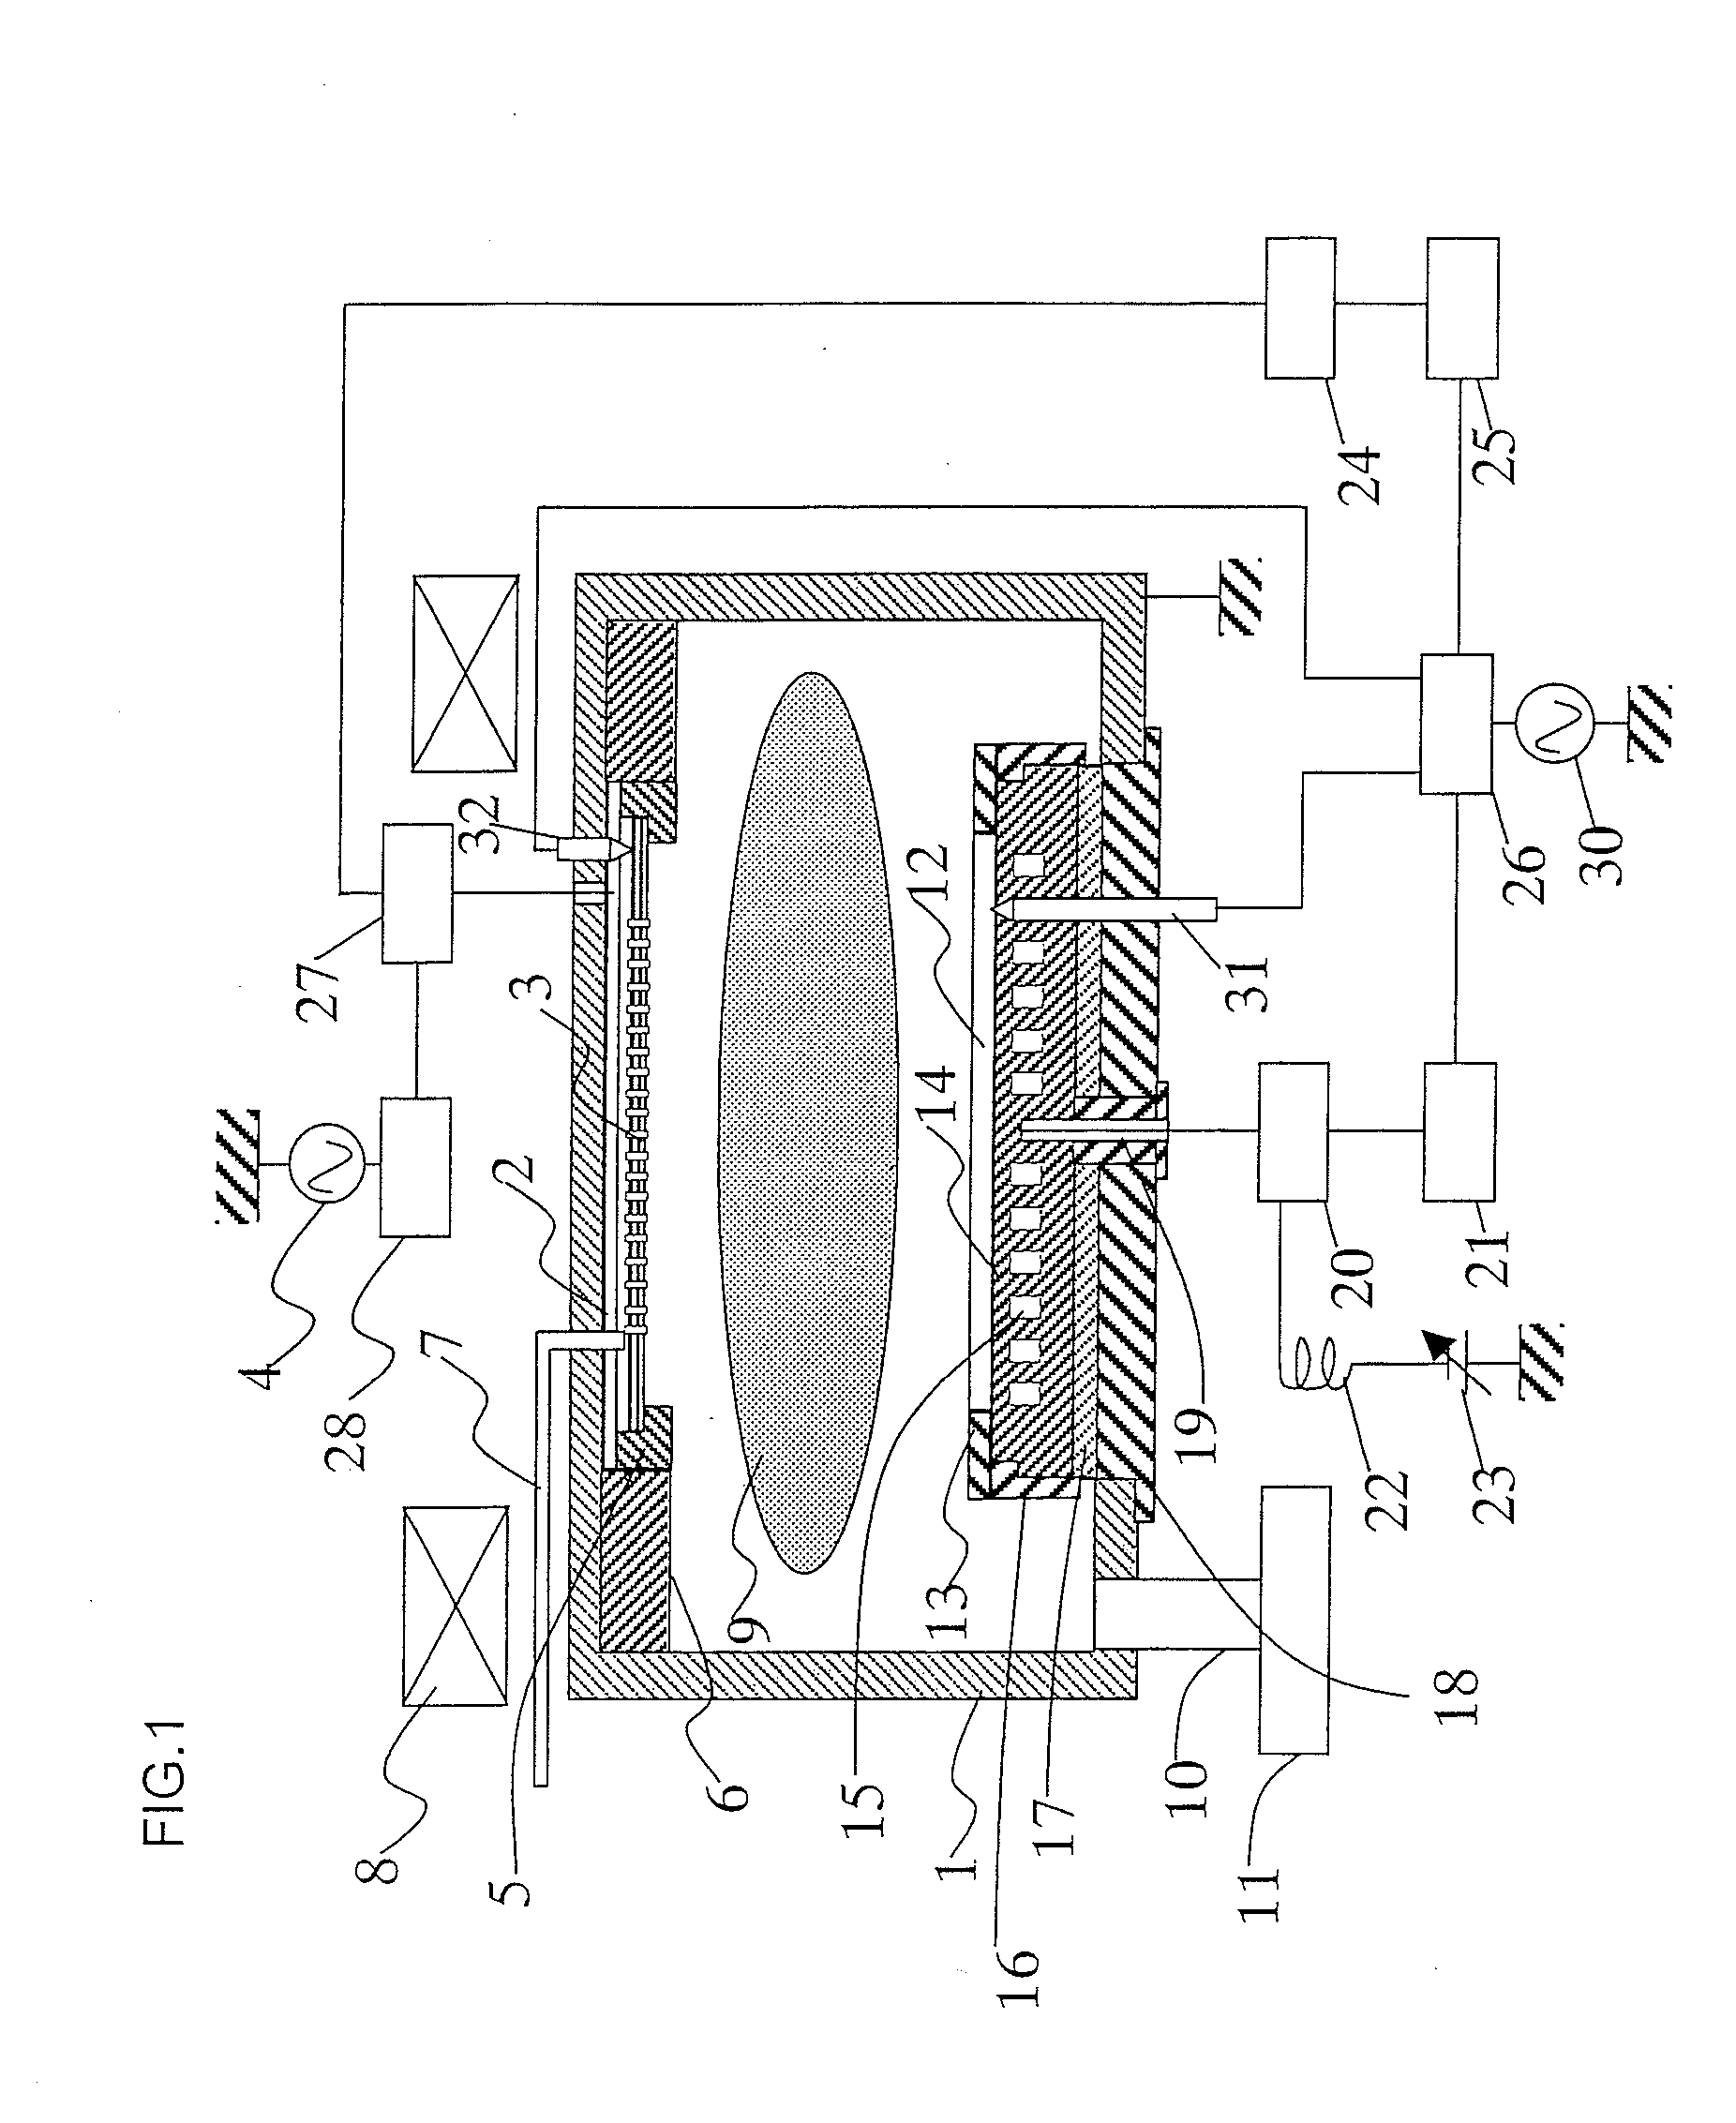 Plasma Processing Apparatus And Method For Controlling The Same